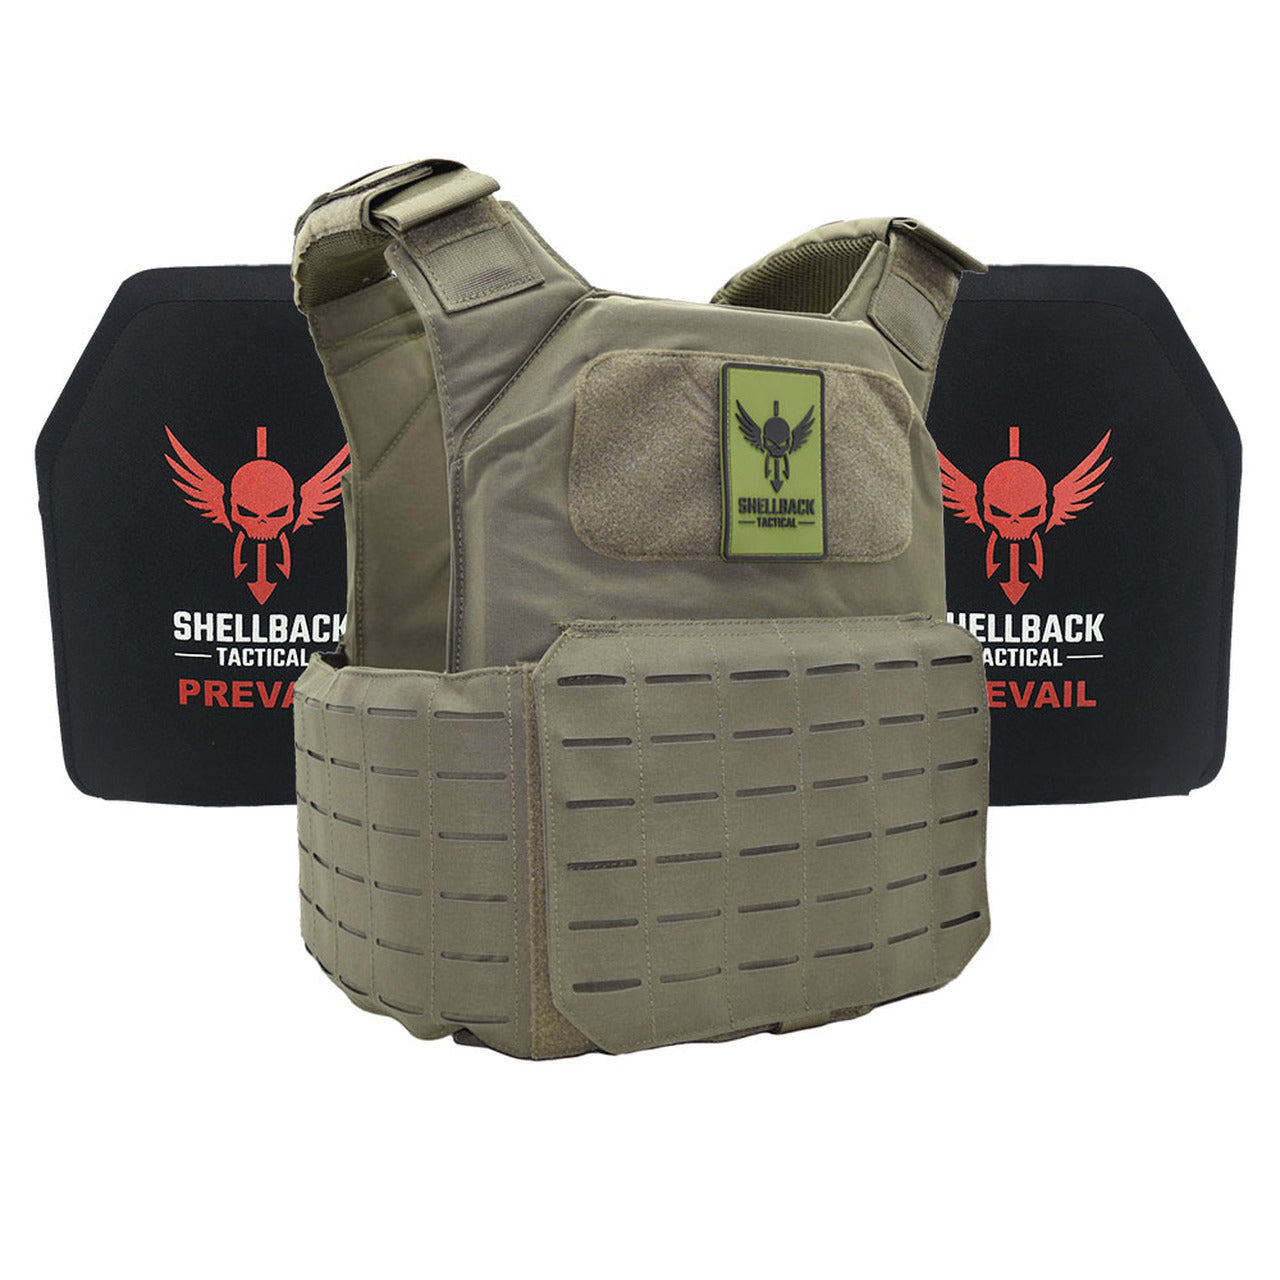 A Shellback Tactical Shield 2.0 Active Shooter Kit with Level IV 1155 Plates with a red and black logo on it.